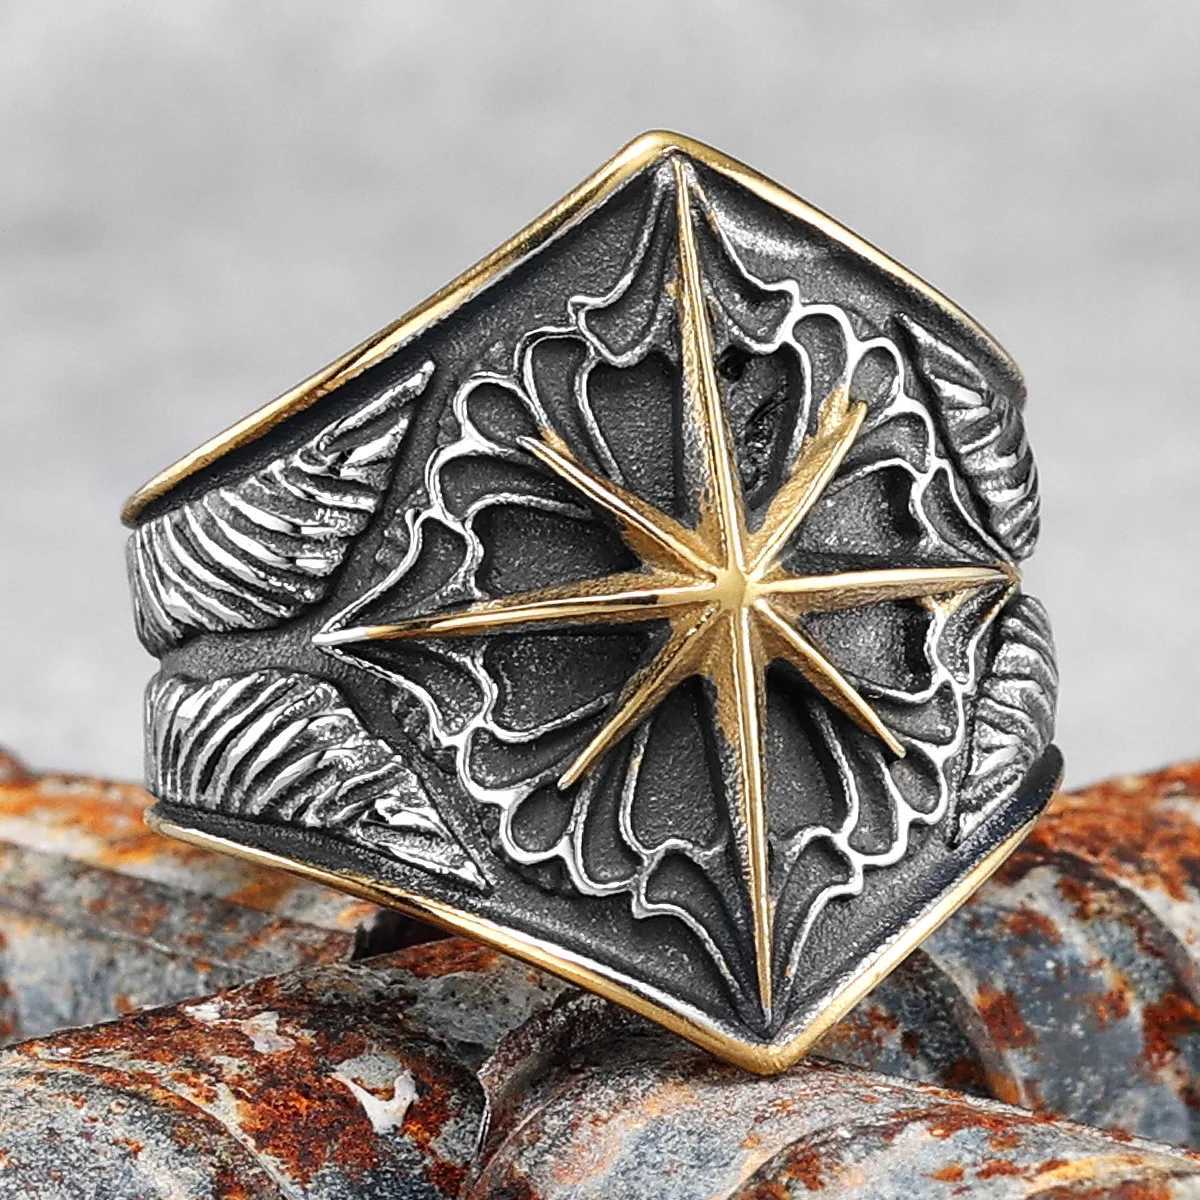 Band Rings Starry Ring 316L Stainless Steel Star Men Ring Punk Rock Rap for Biker Male Boyfriend Mariner Jewelry Creative Gift Dropshipping 240125